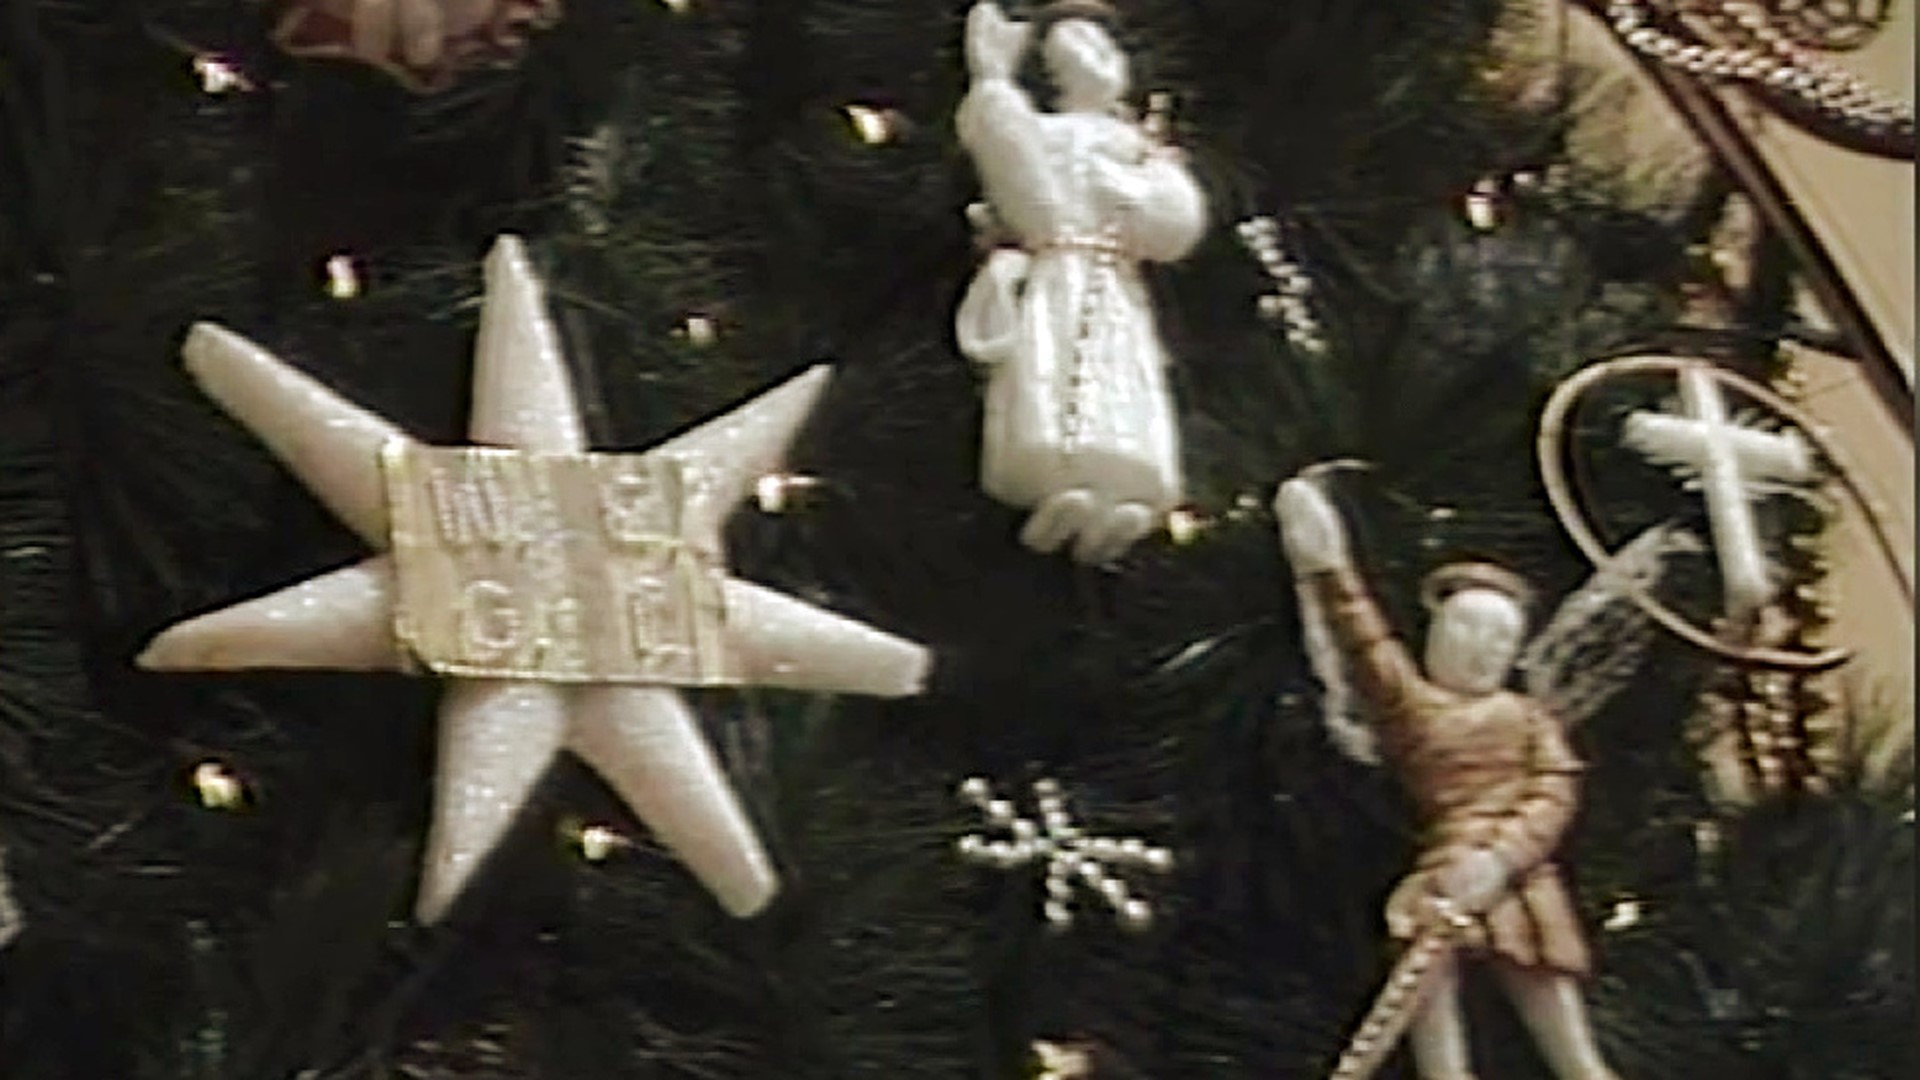 In 1989, Mike Stevens took some time to admire handmade symbols of faith and devotion.